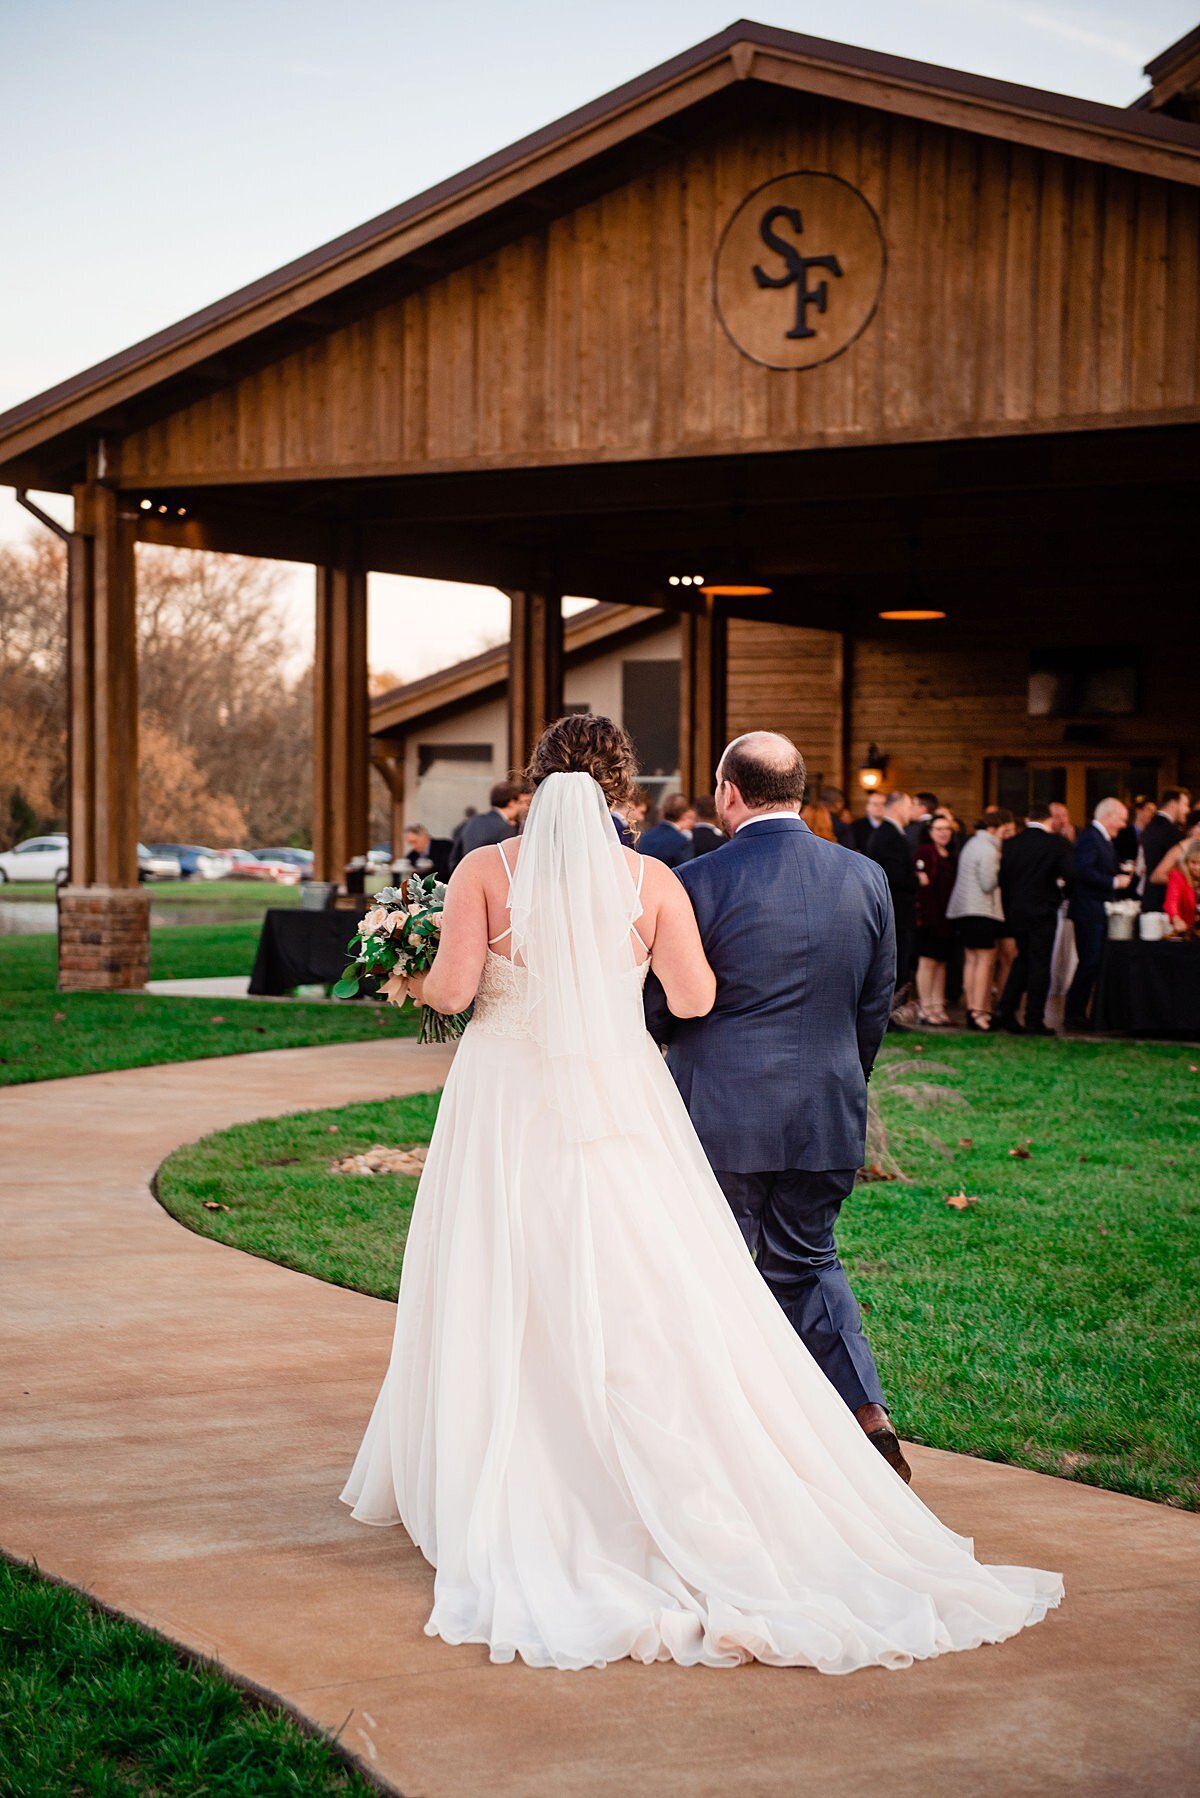 The bride, wearing a long lace wedding gown and veil walks hand in hand with her groom dressed in a dark navy suit towards their guests celebrating their fall wedding at Sycamore Farm